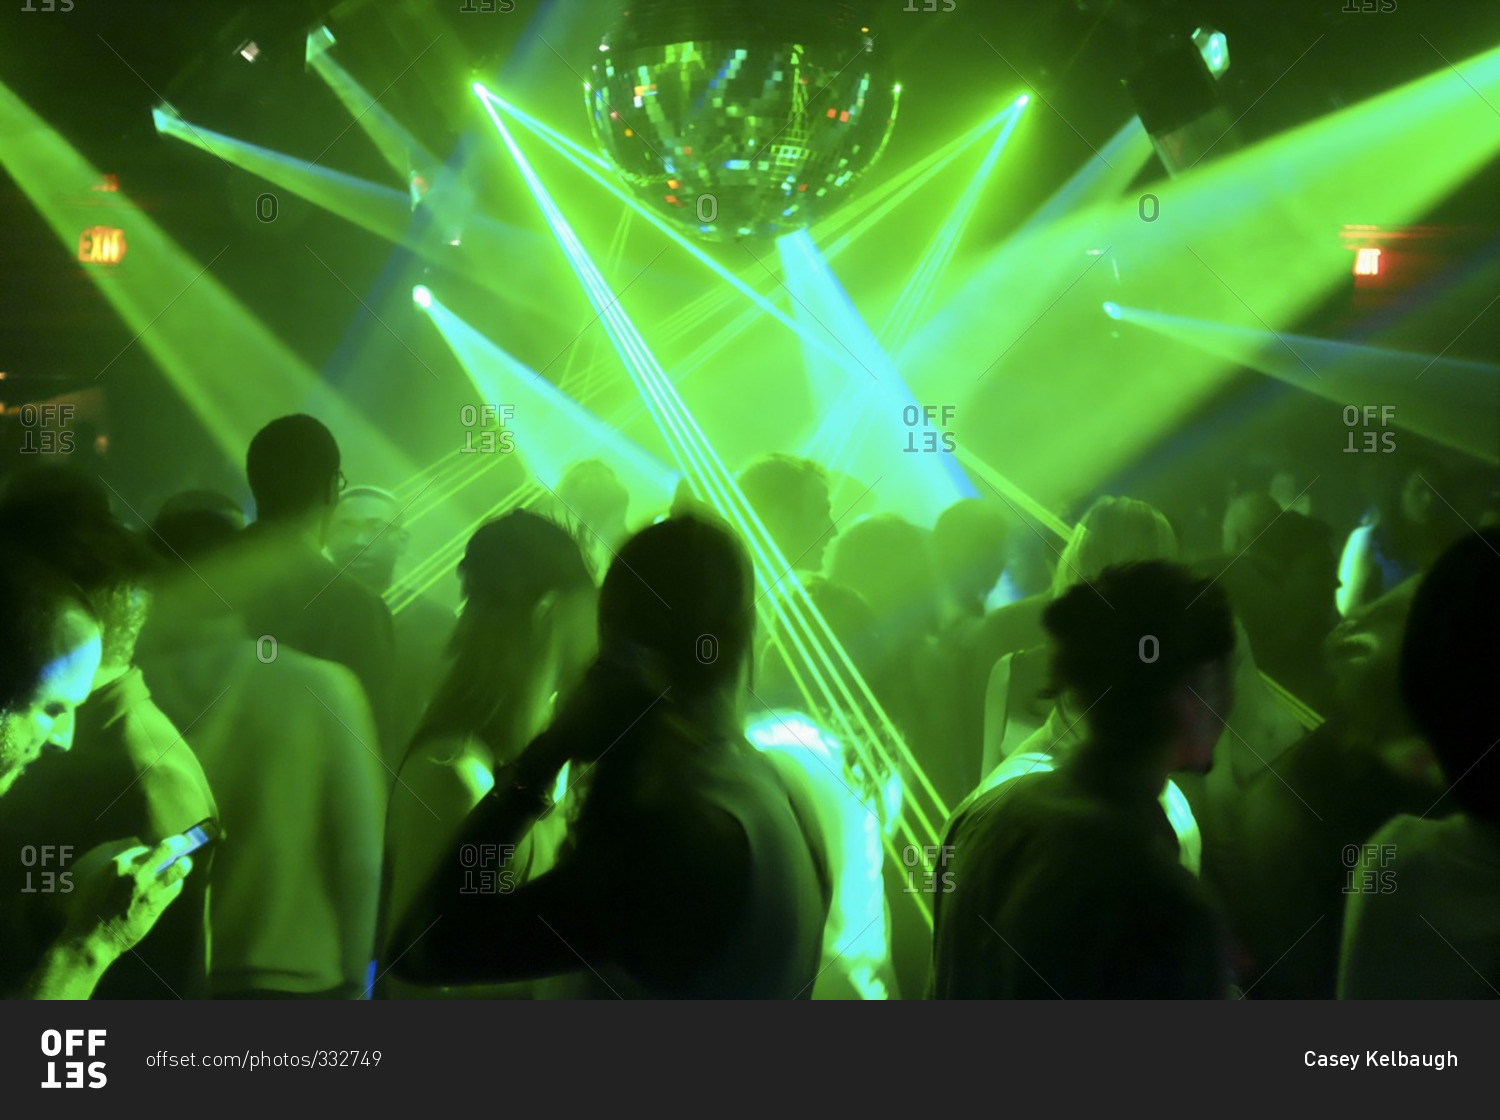 Silhouette of a crowd at a night club with mirror ball and green laser light display